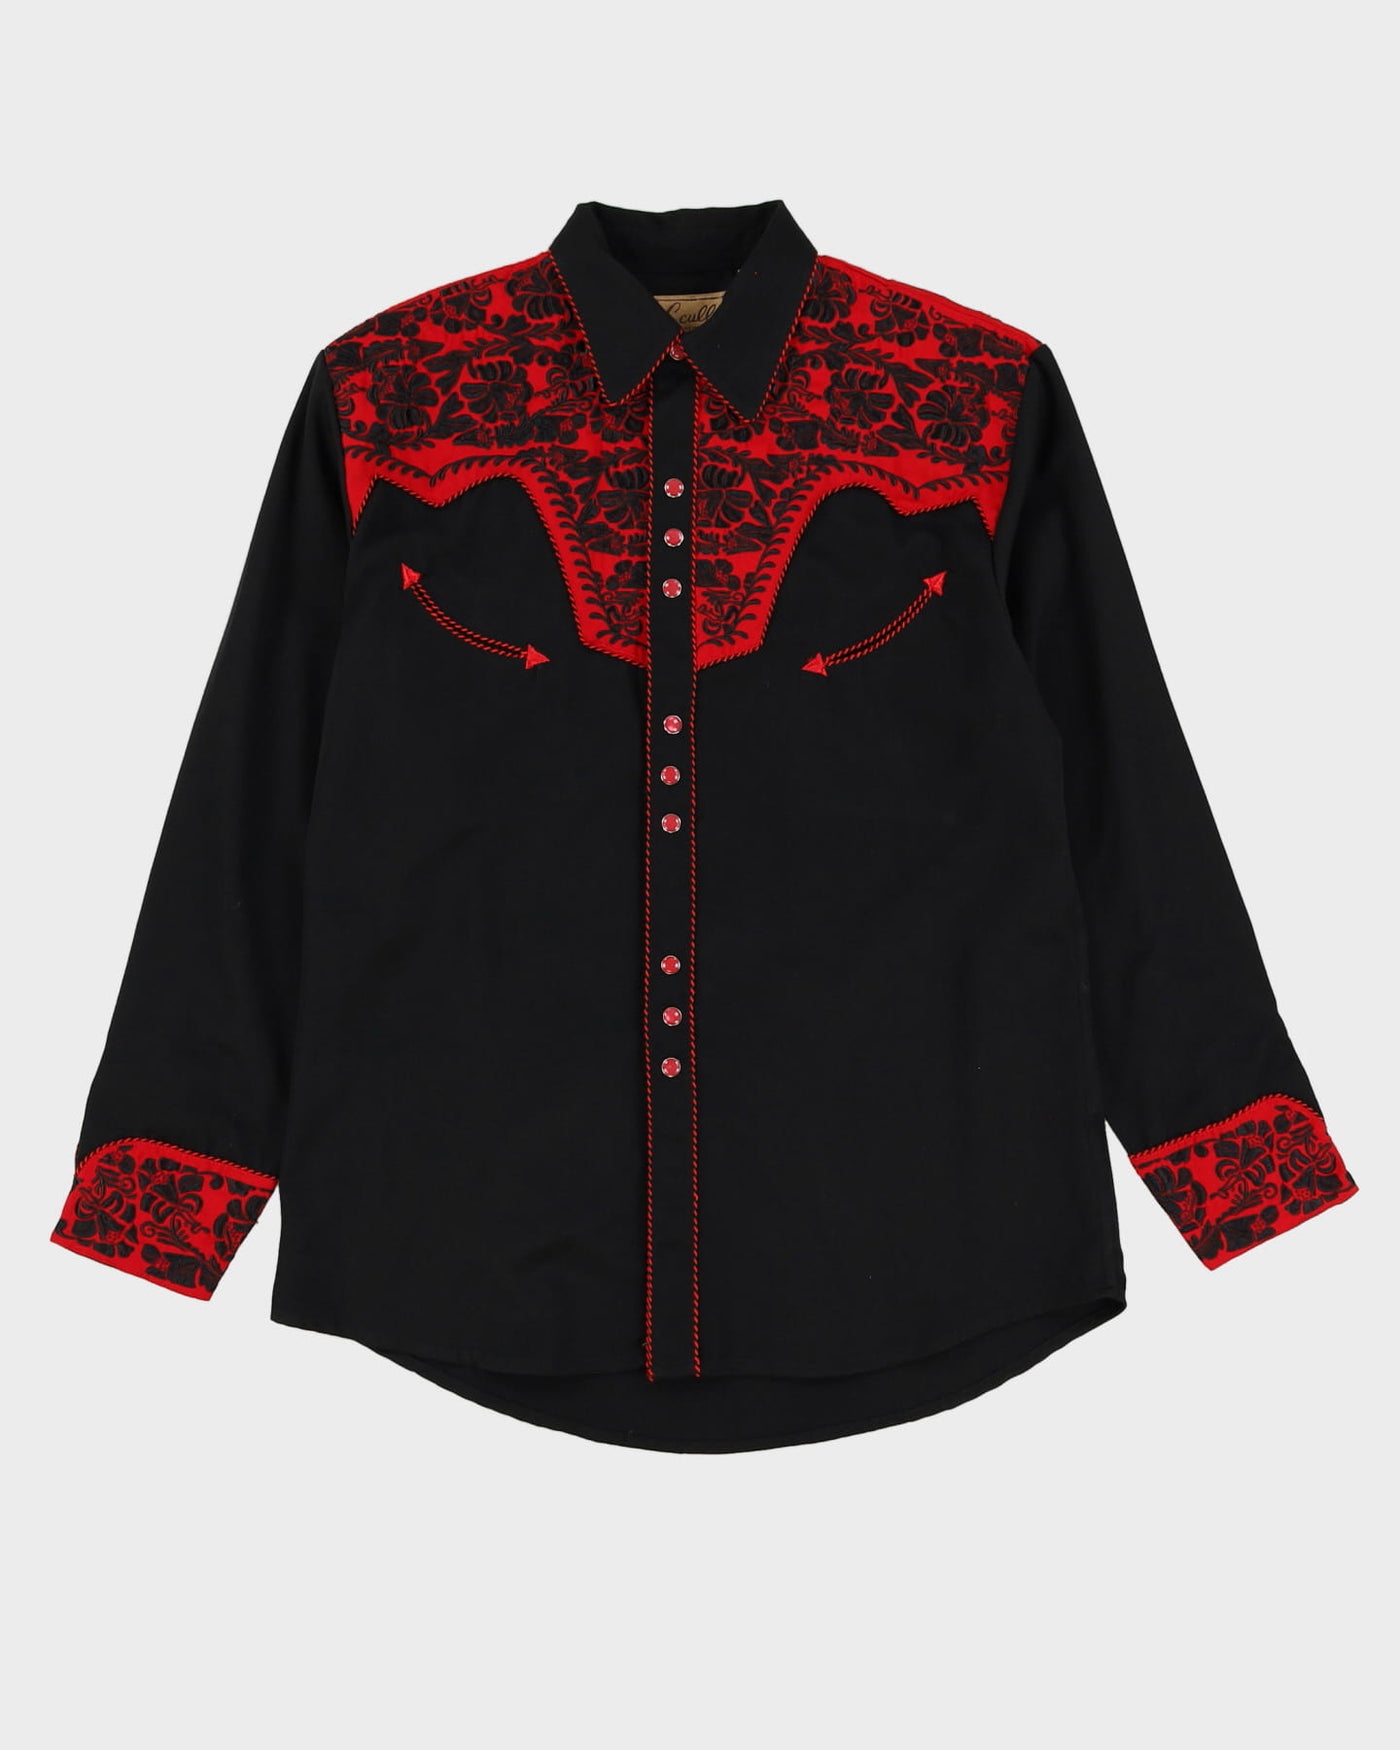 Vintage Scully Black / Red Western Shirt - M